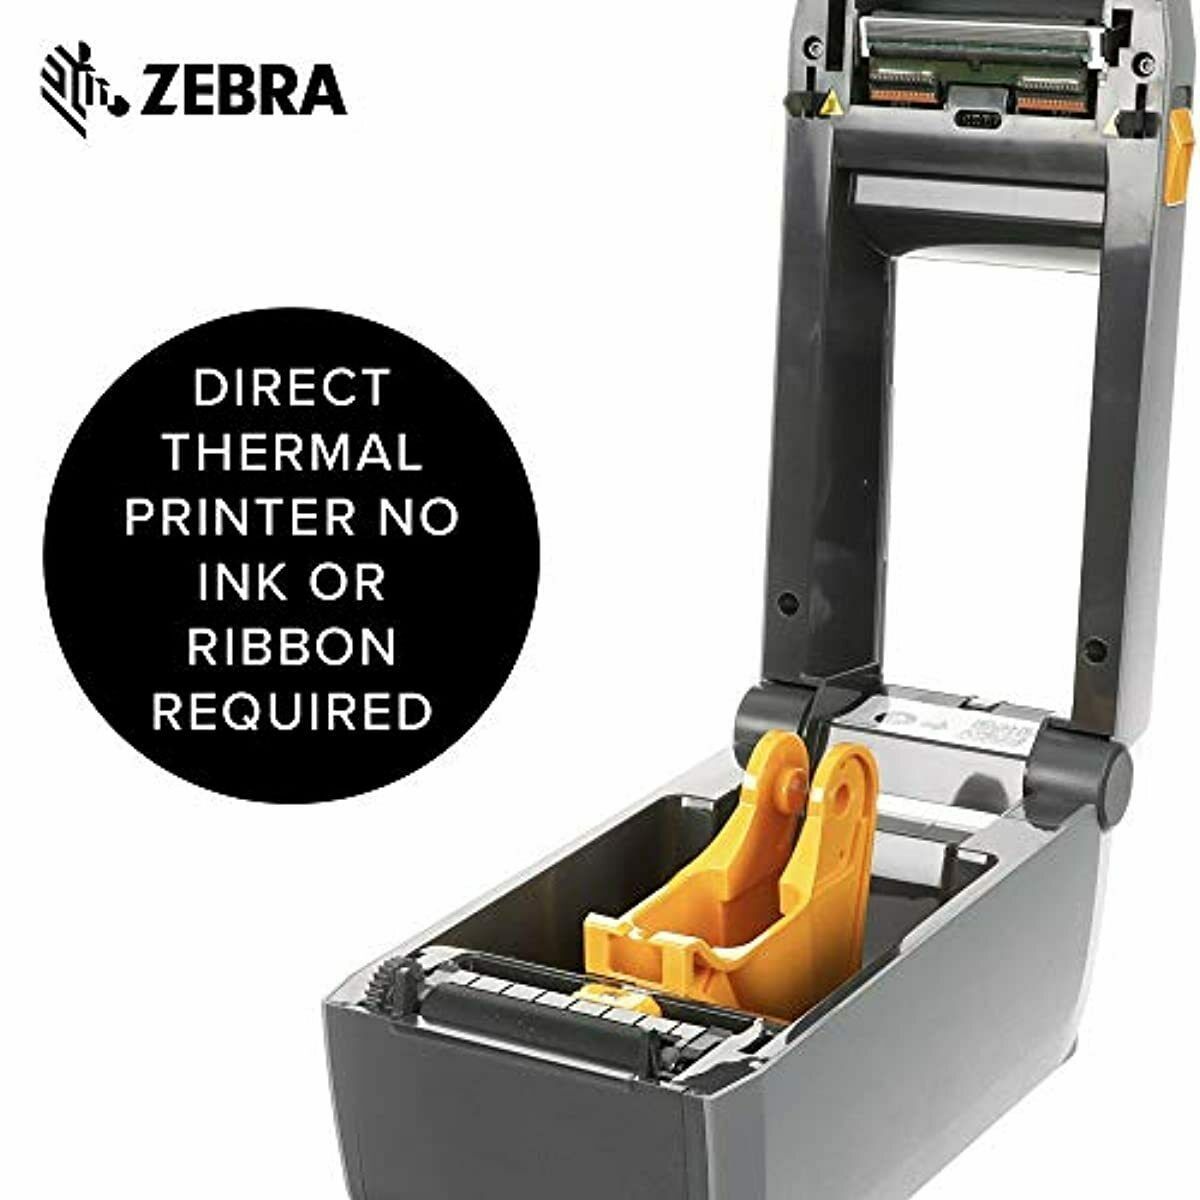 Zebra Zd410 Direct Thermal Desktop Printer For Labels Receipts Barcodes Tag Printers 1991